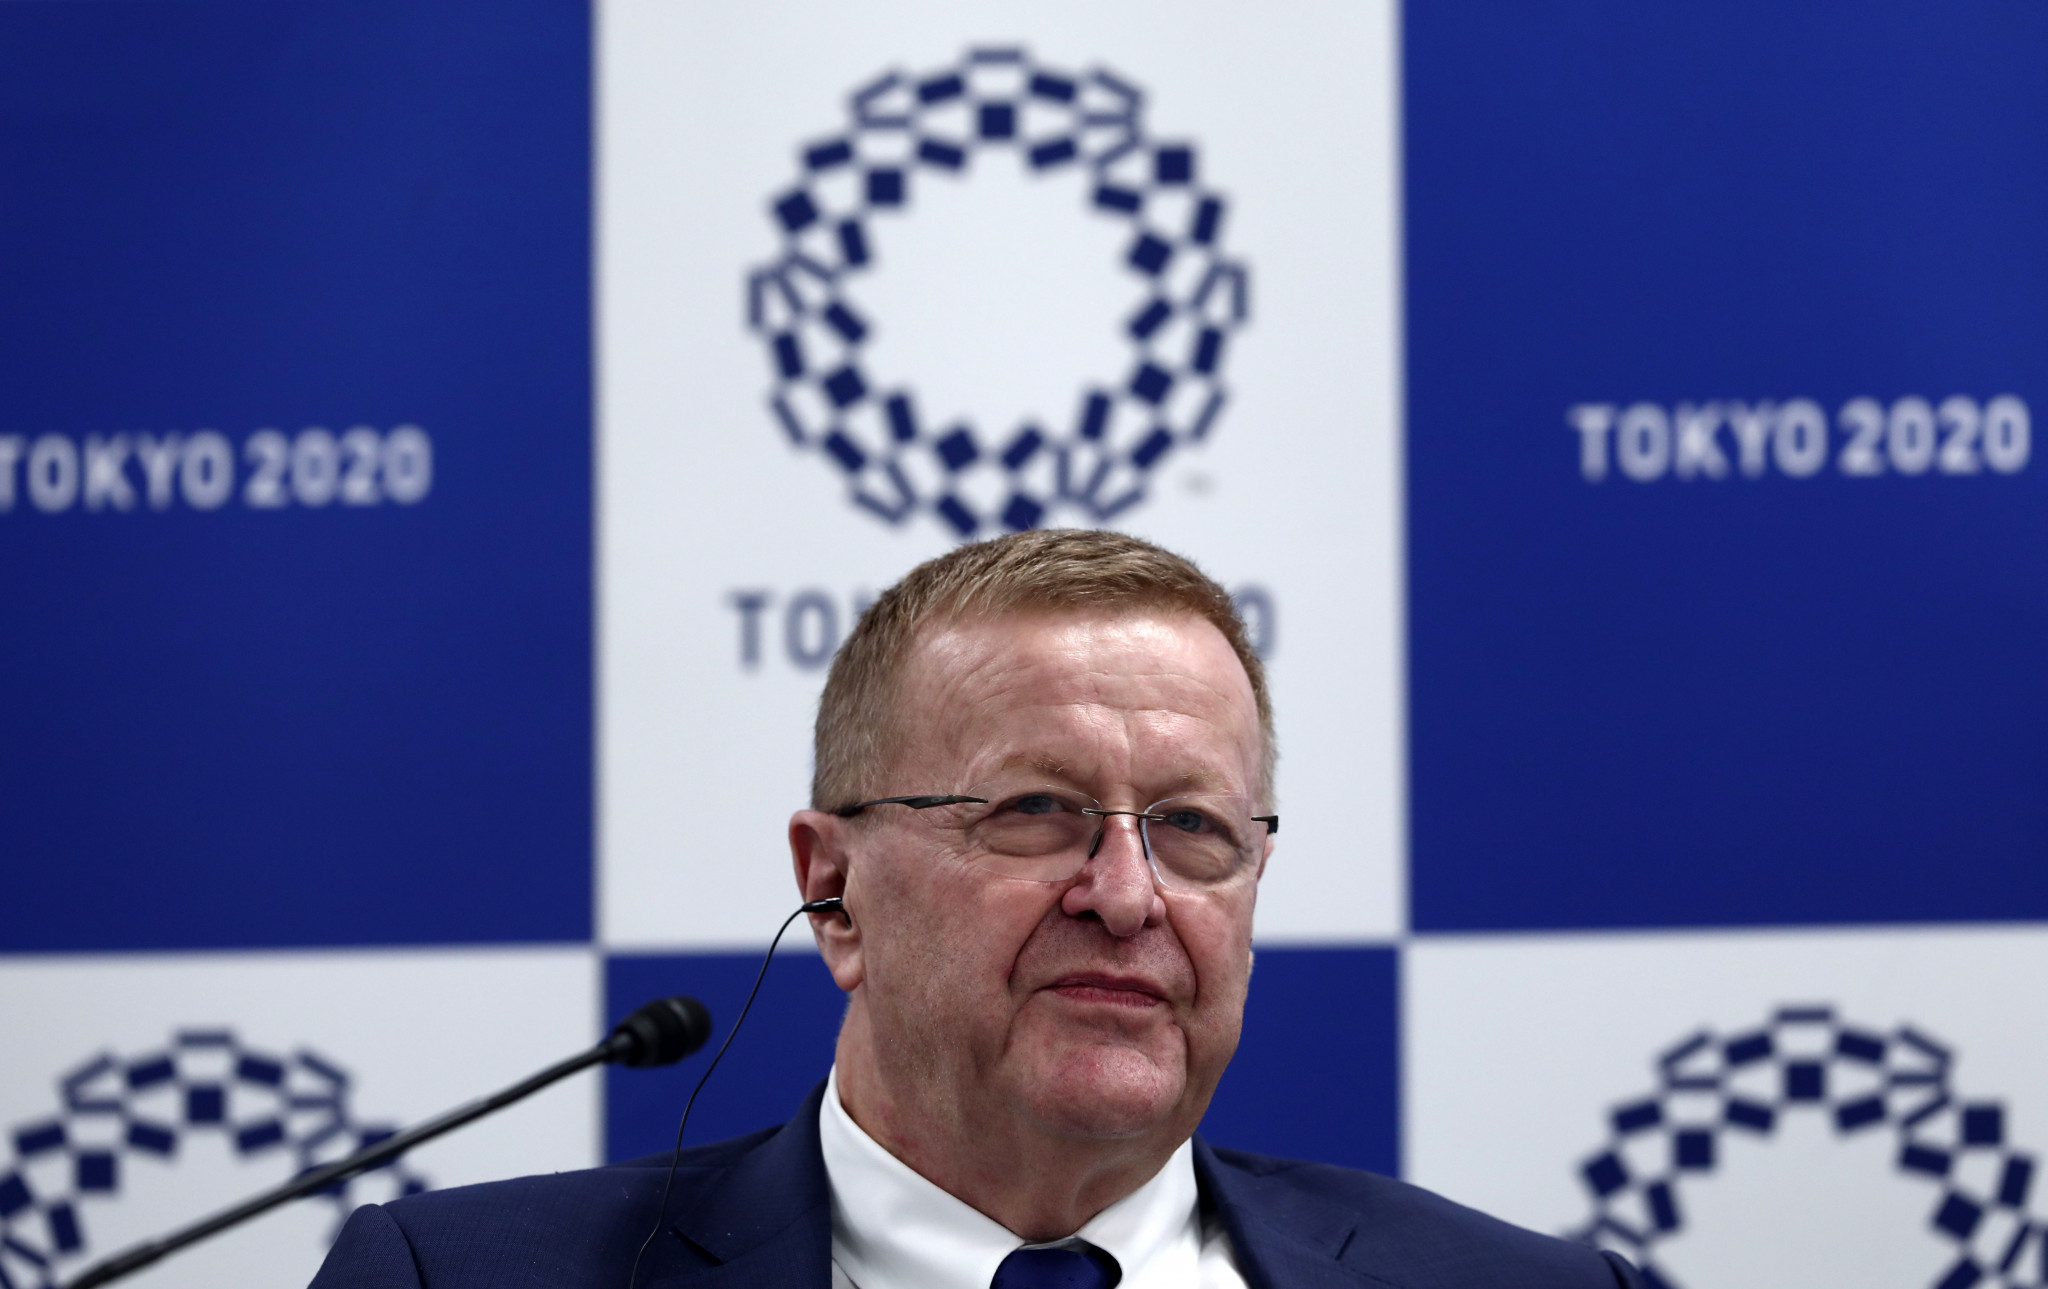 IOC Coordination Commission chair John Coates says companies are already benefiting from the Games ©Getty Images